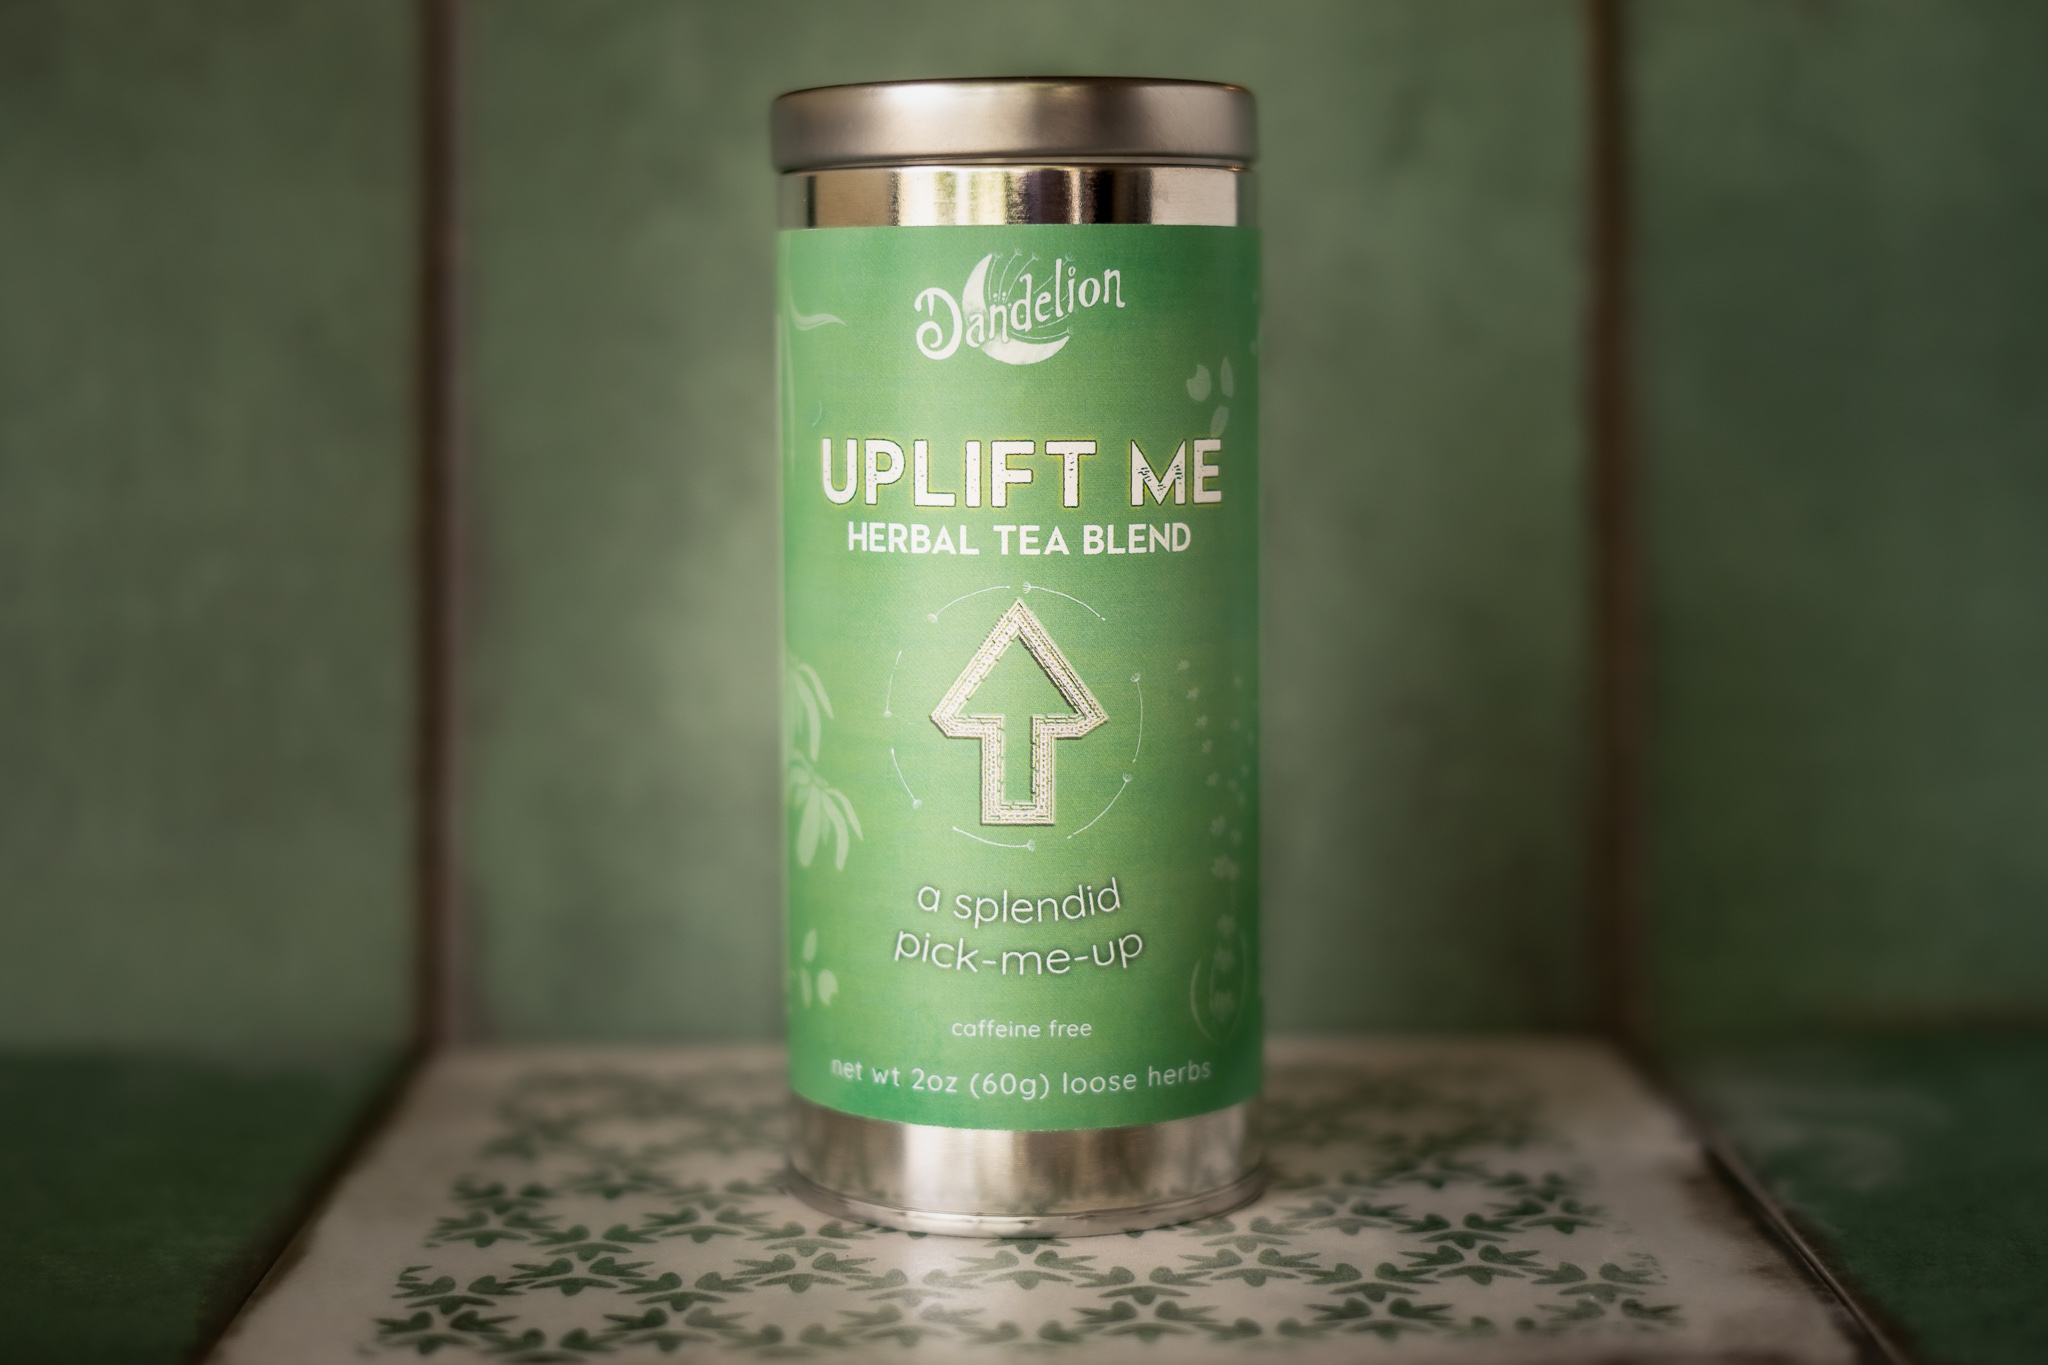 A tin of Uplift Me Tea from dandelion teahouse sits on light green and white floral pattern tile. The label is mint green with yellow accents and an "UP" arrow in the middle of it.